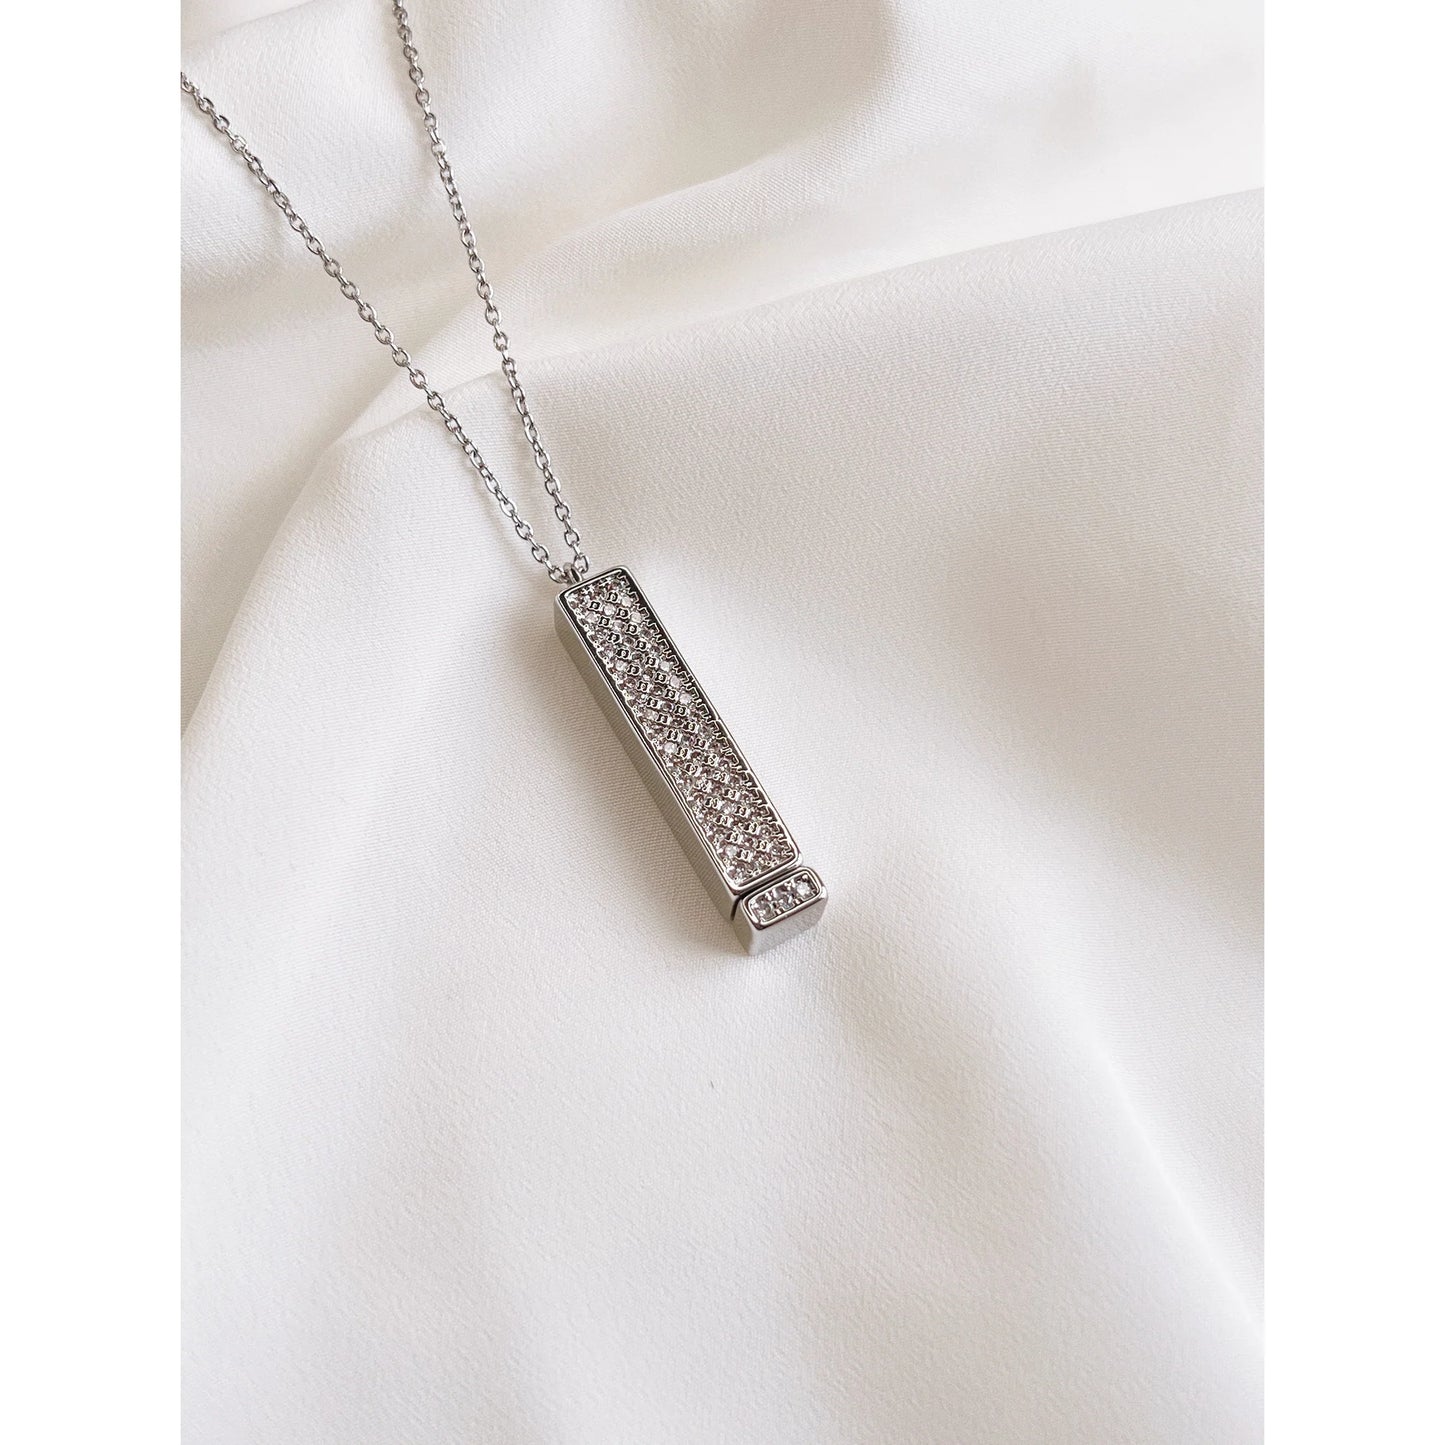 Jew | "I love you" Necklace